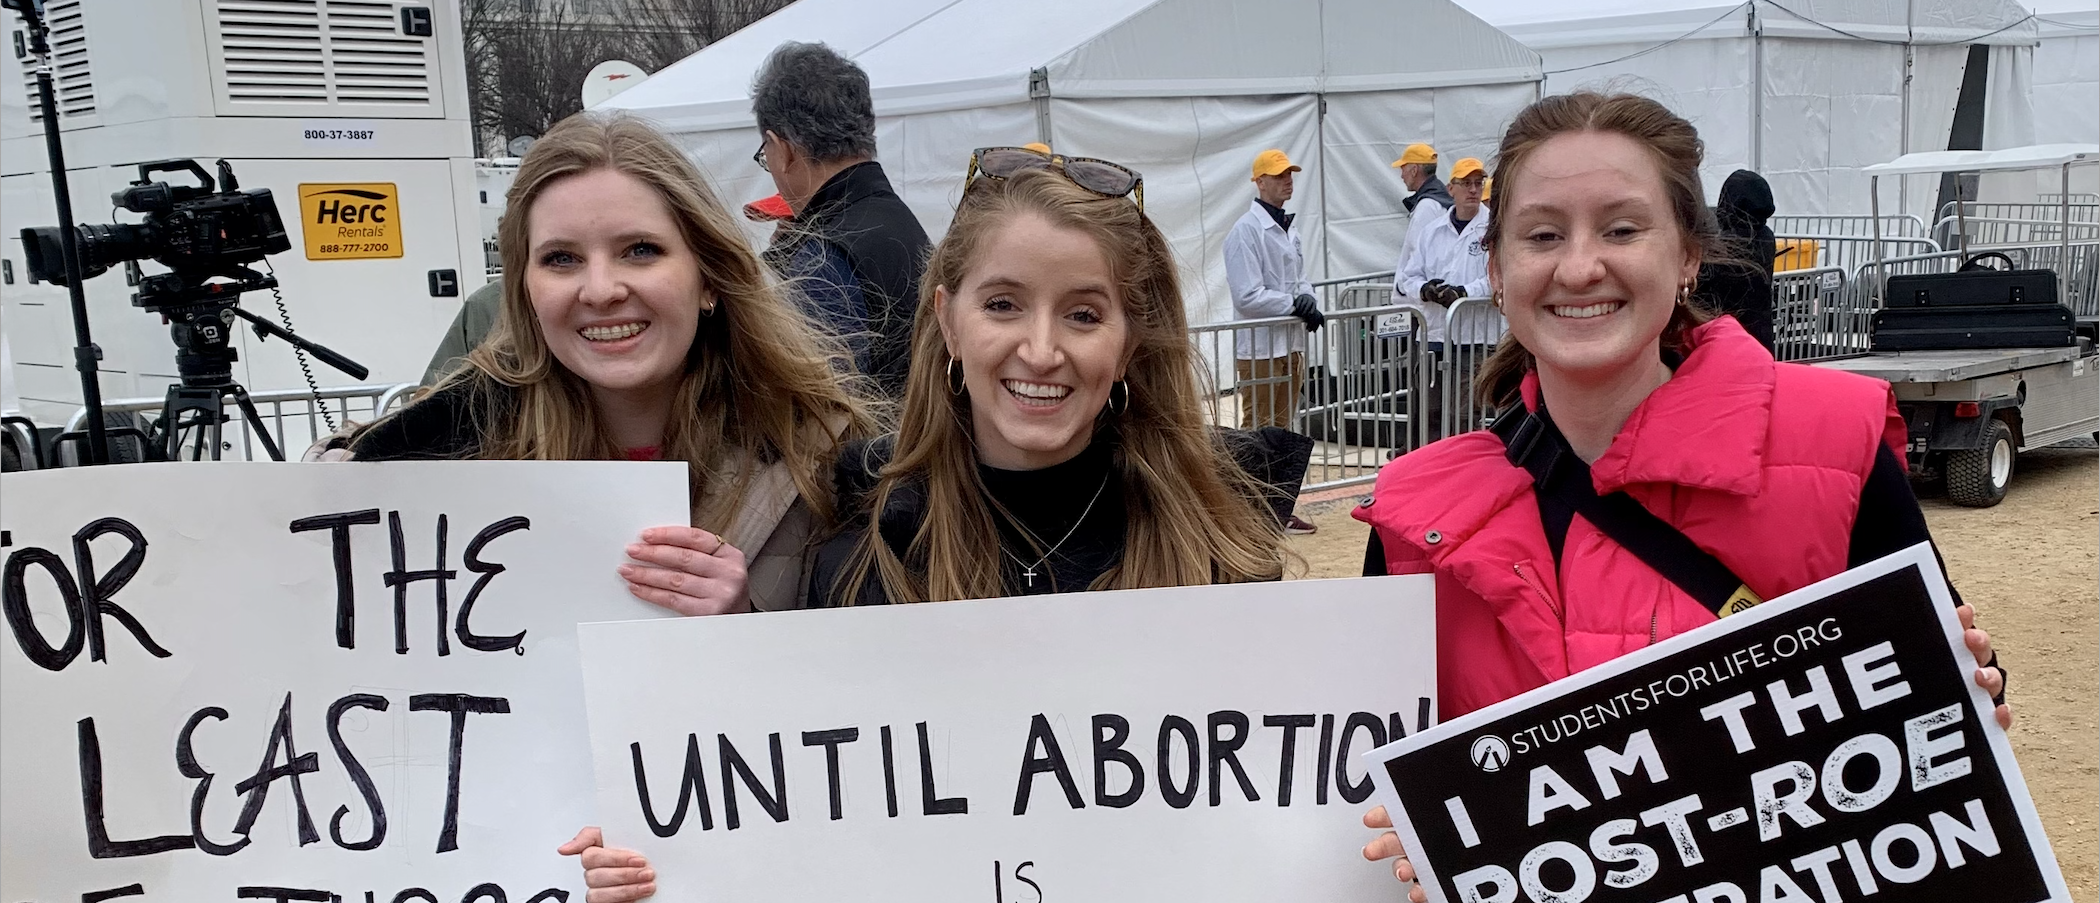 The March For Life Has Never Had To Struggle For Relevance, Until Now